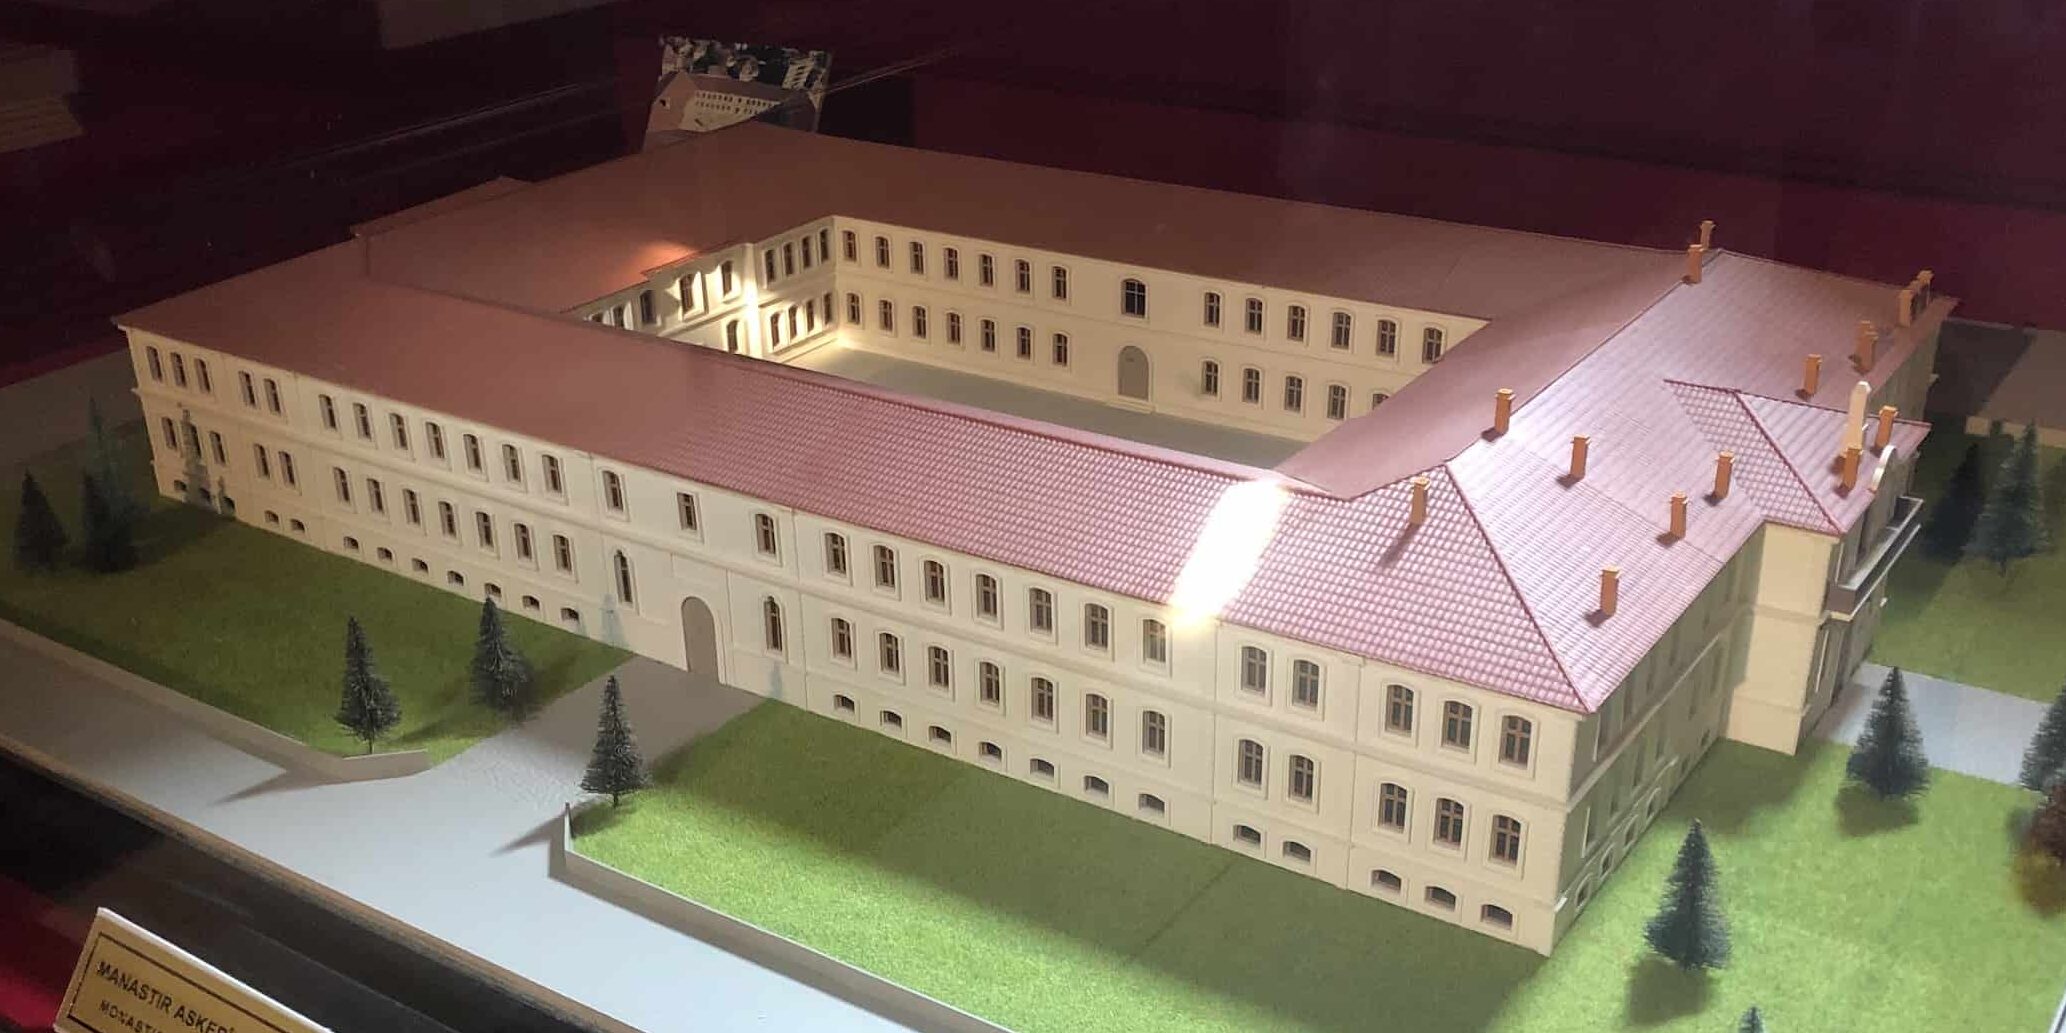 Model of the Monastır Military High School at the Atatürk and War of Independence Museum